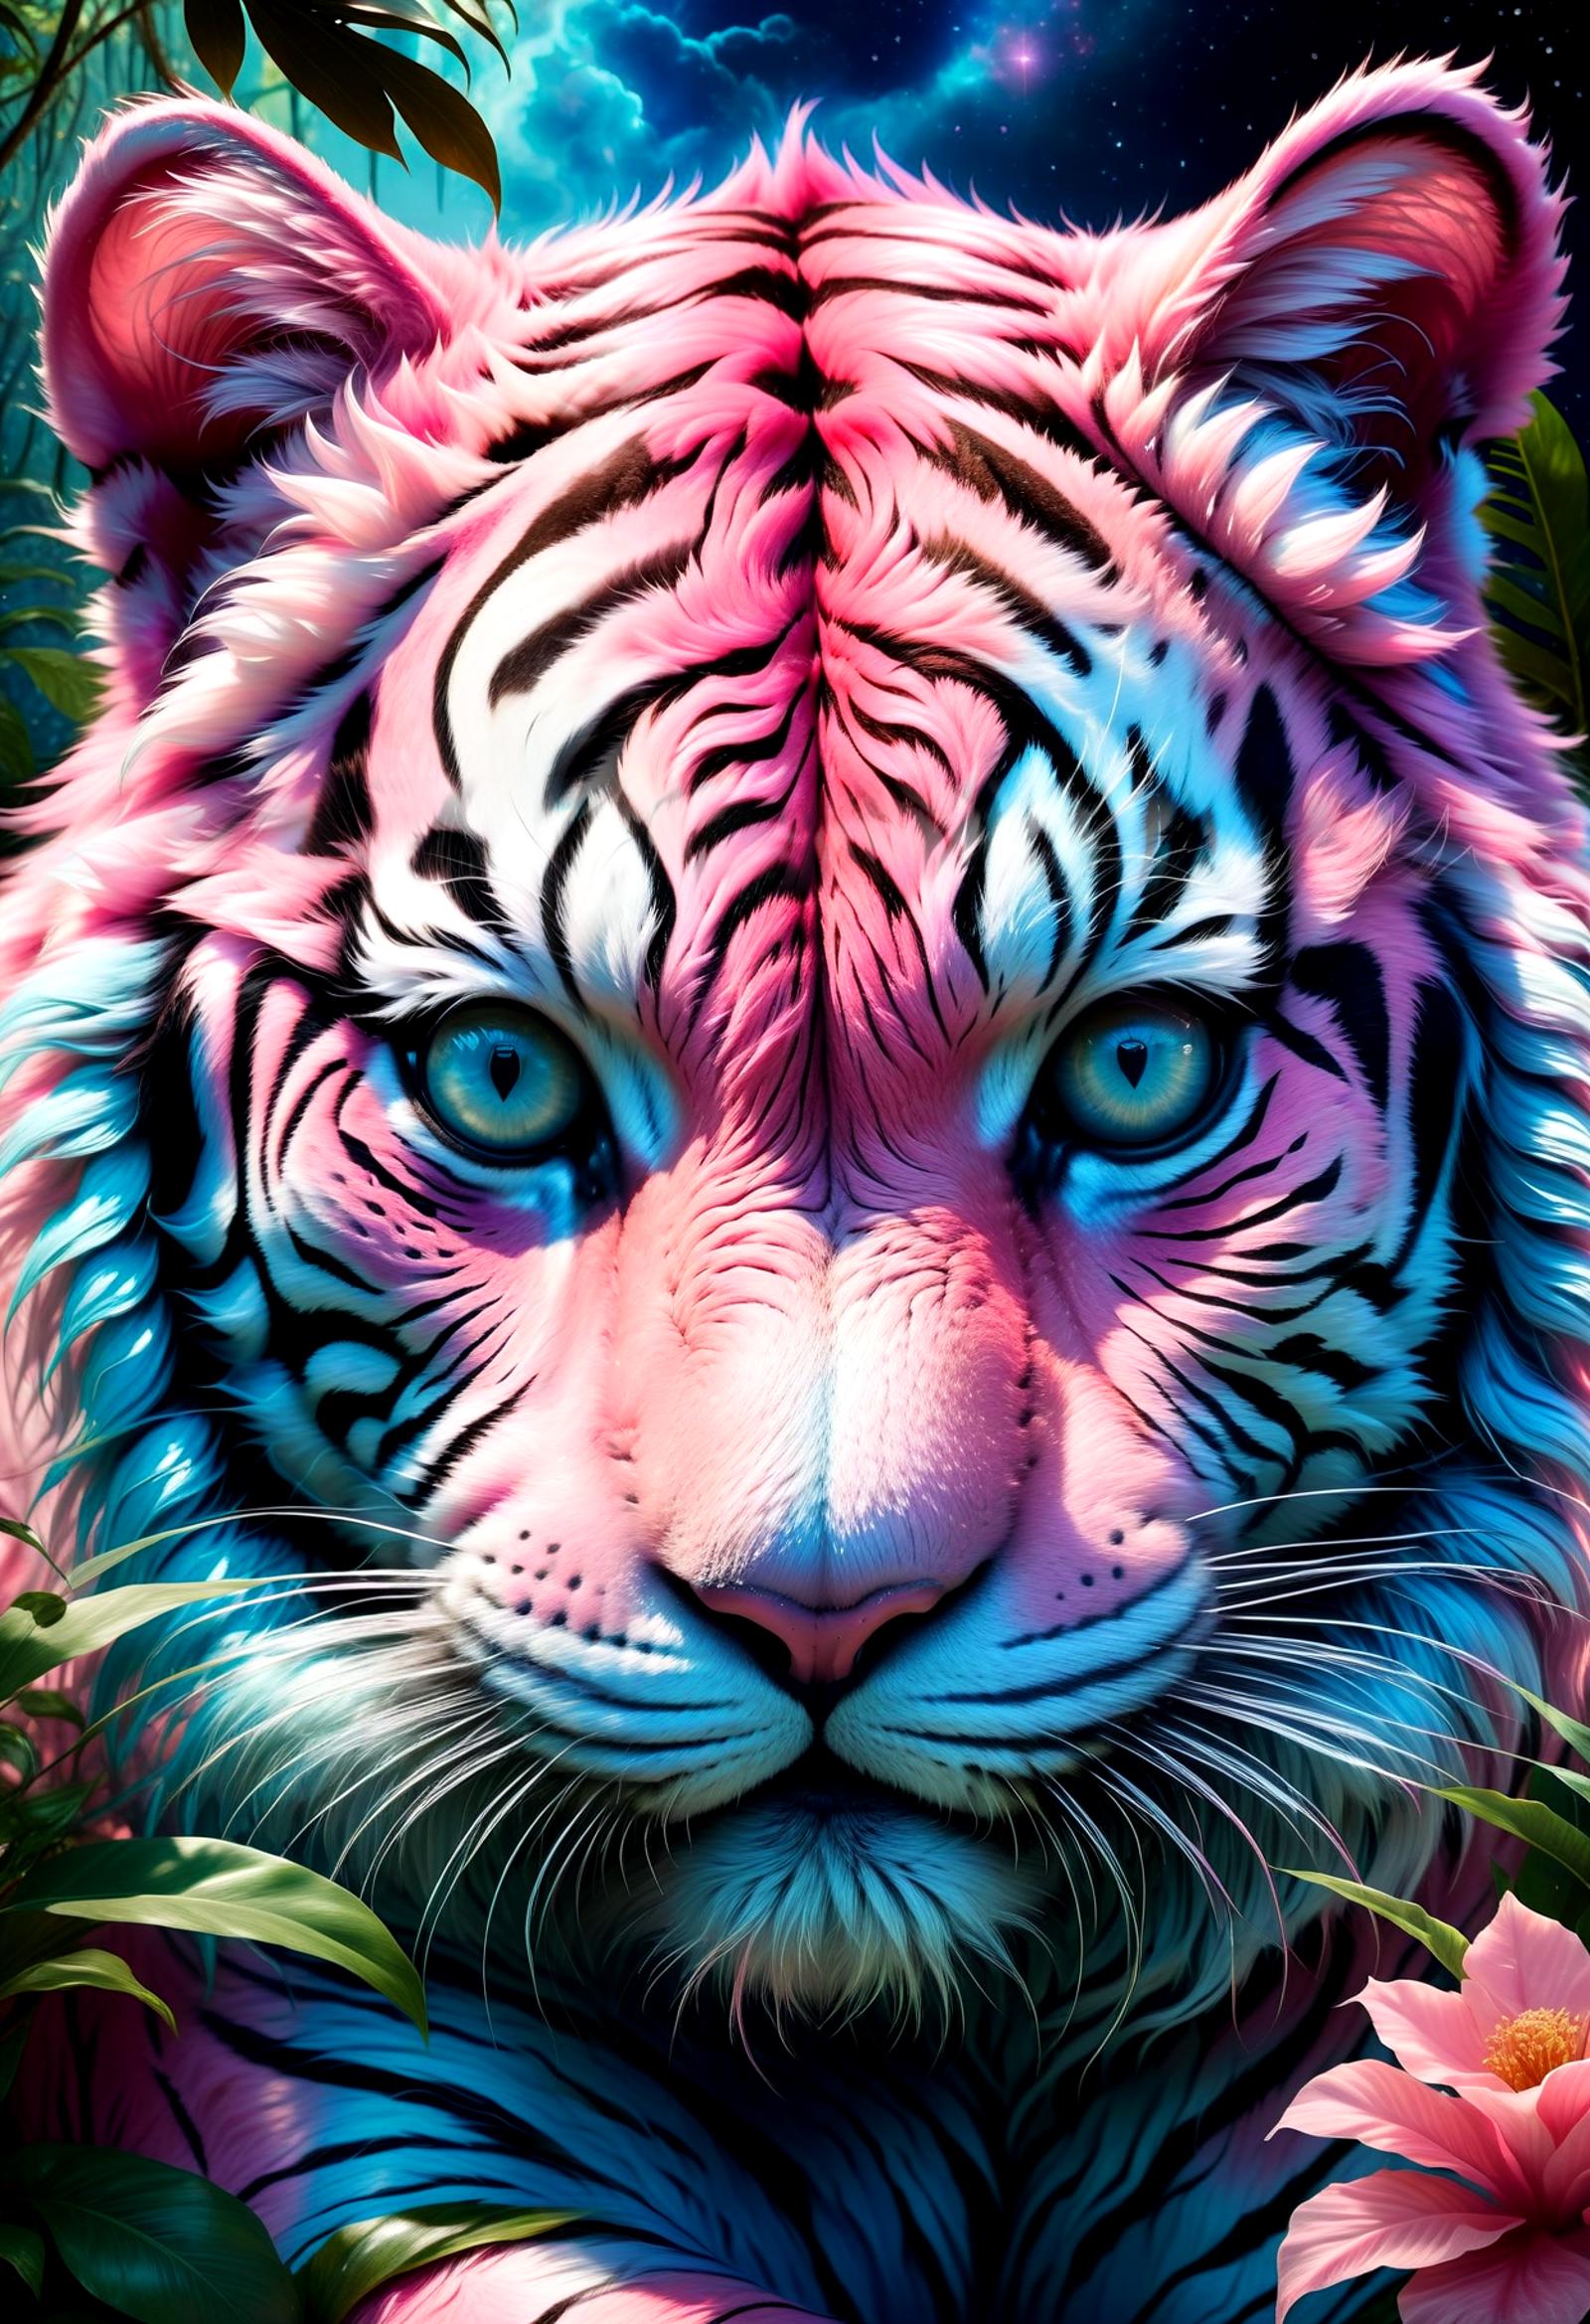 A close-up of a tiger's face with pink and blue colors, surrounded by green leaves.